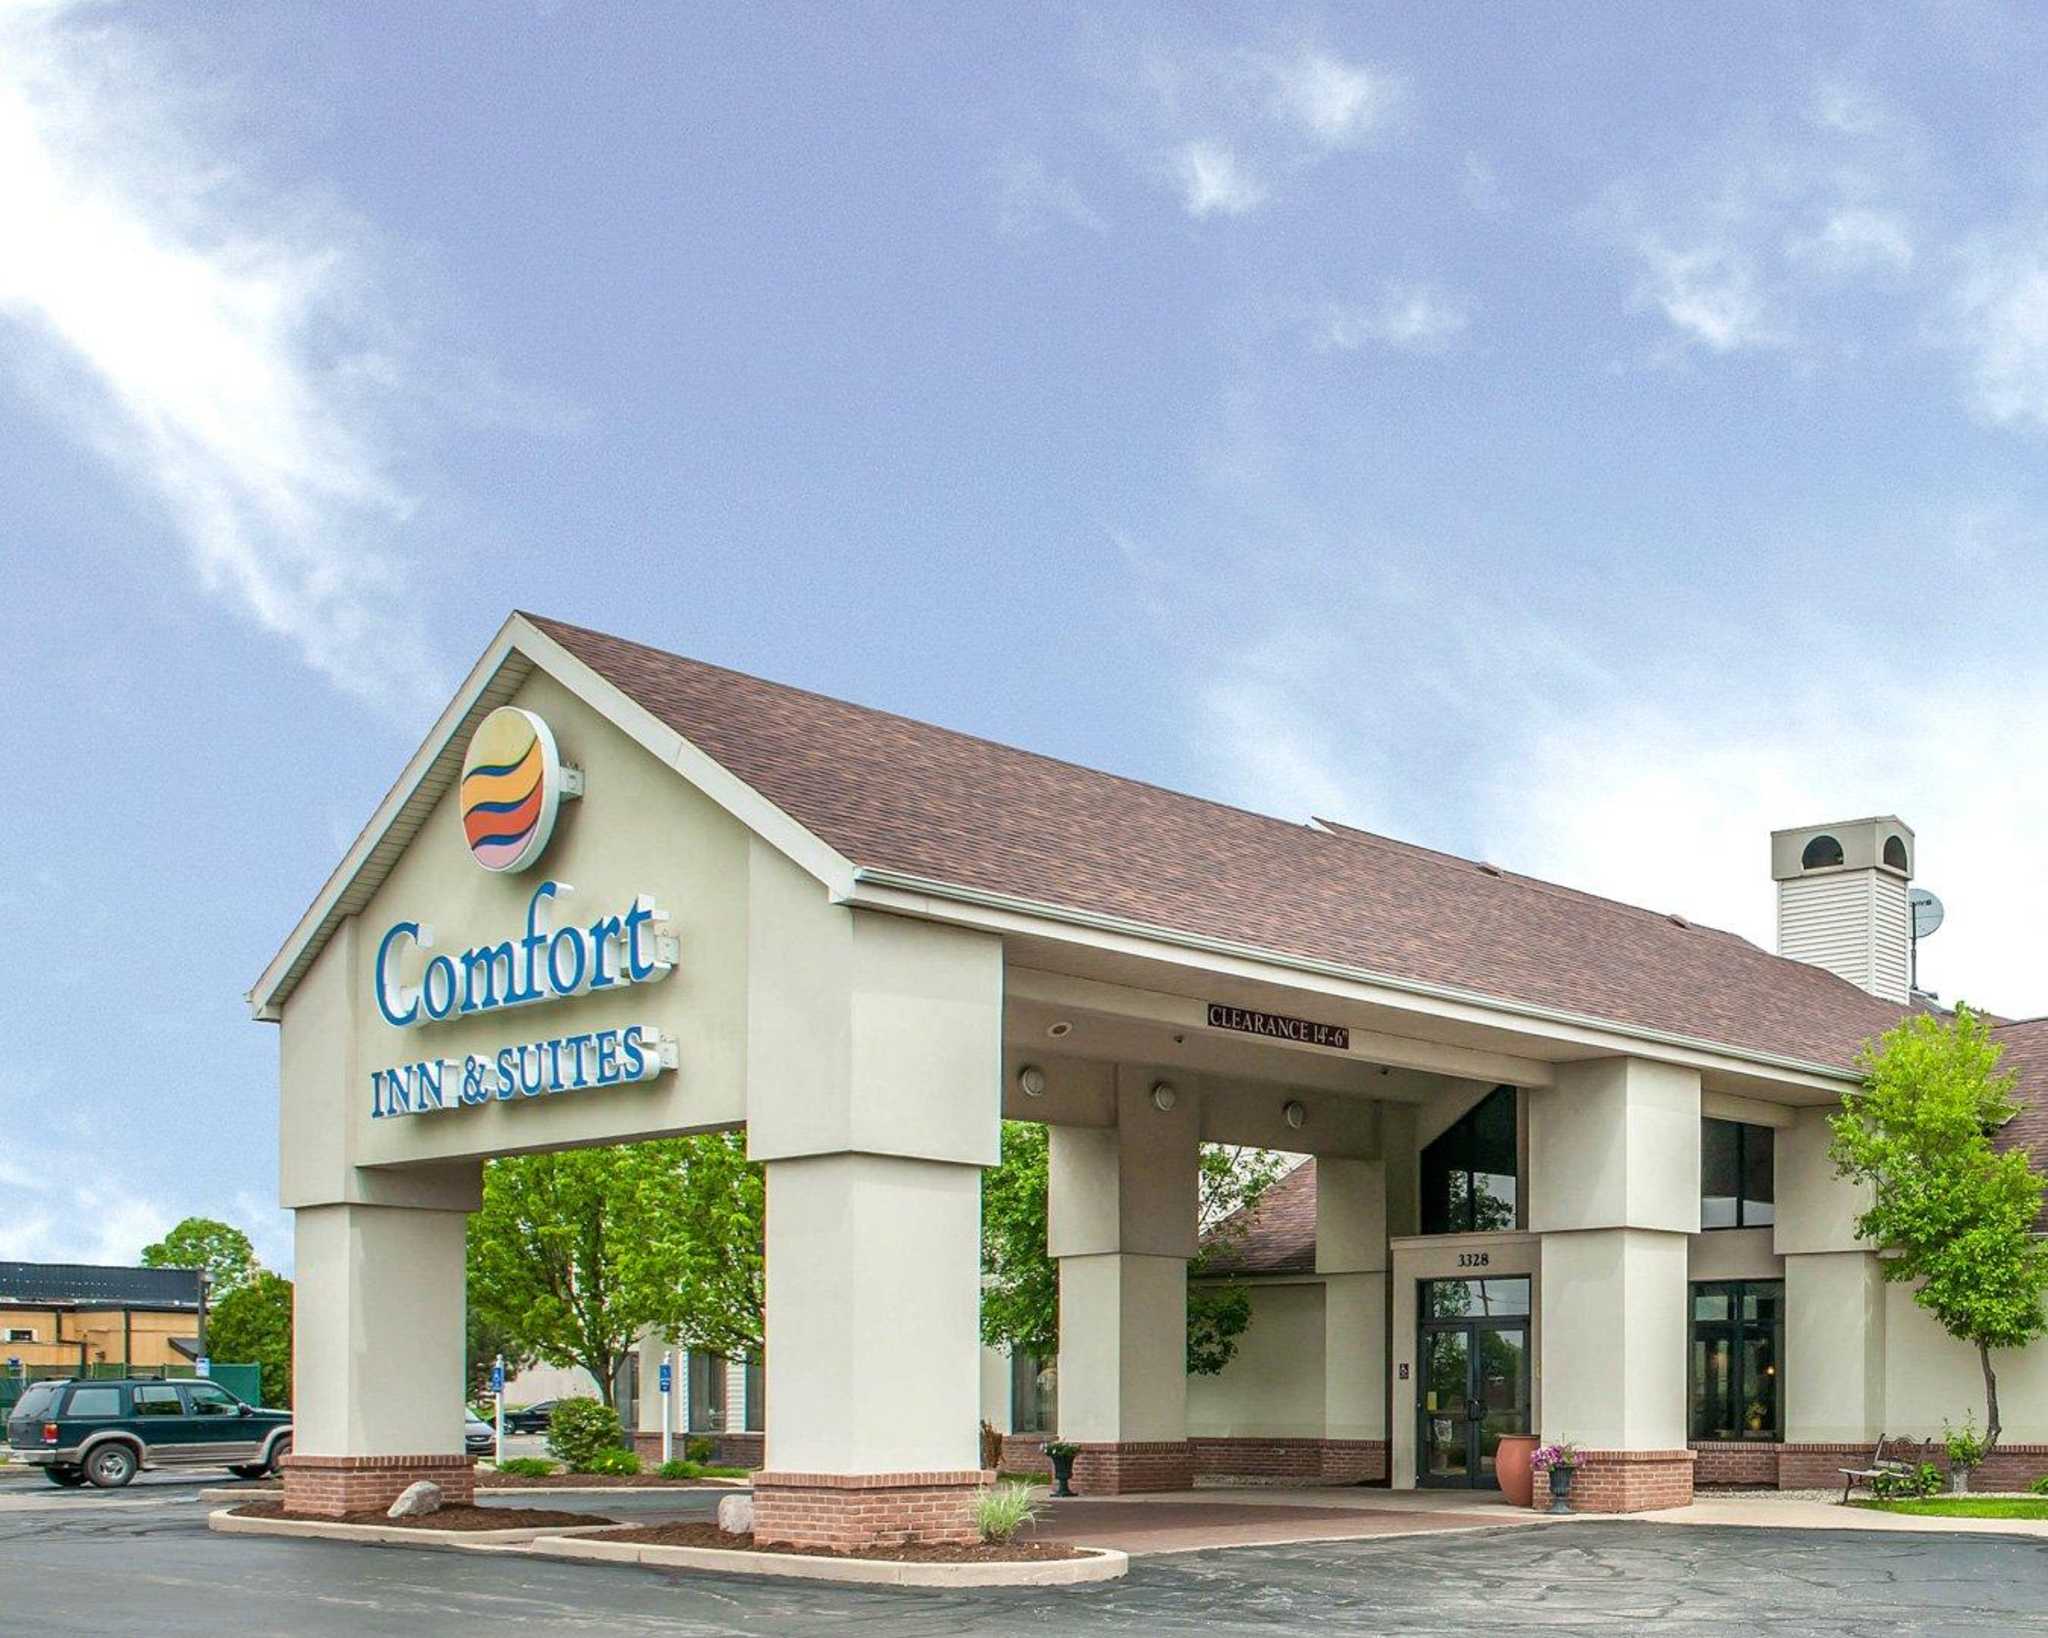 Comfort Inn & Suites Coupons near me in Warsaw, IN 46582 ...